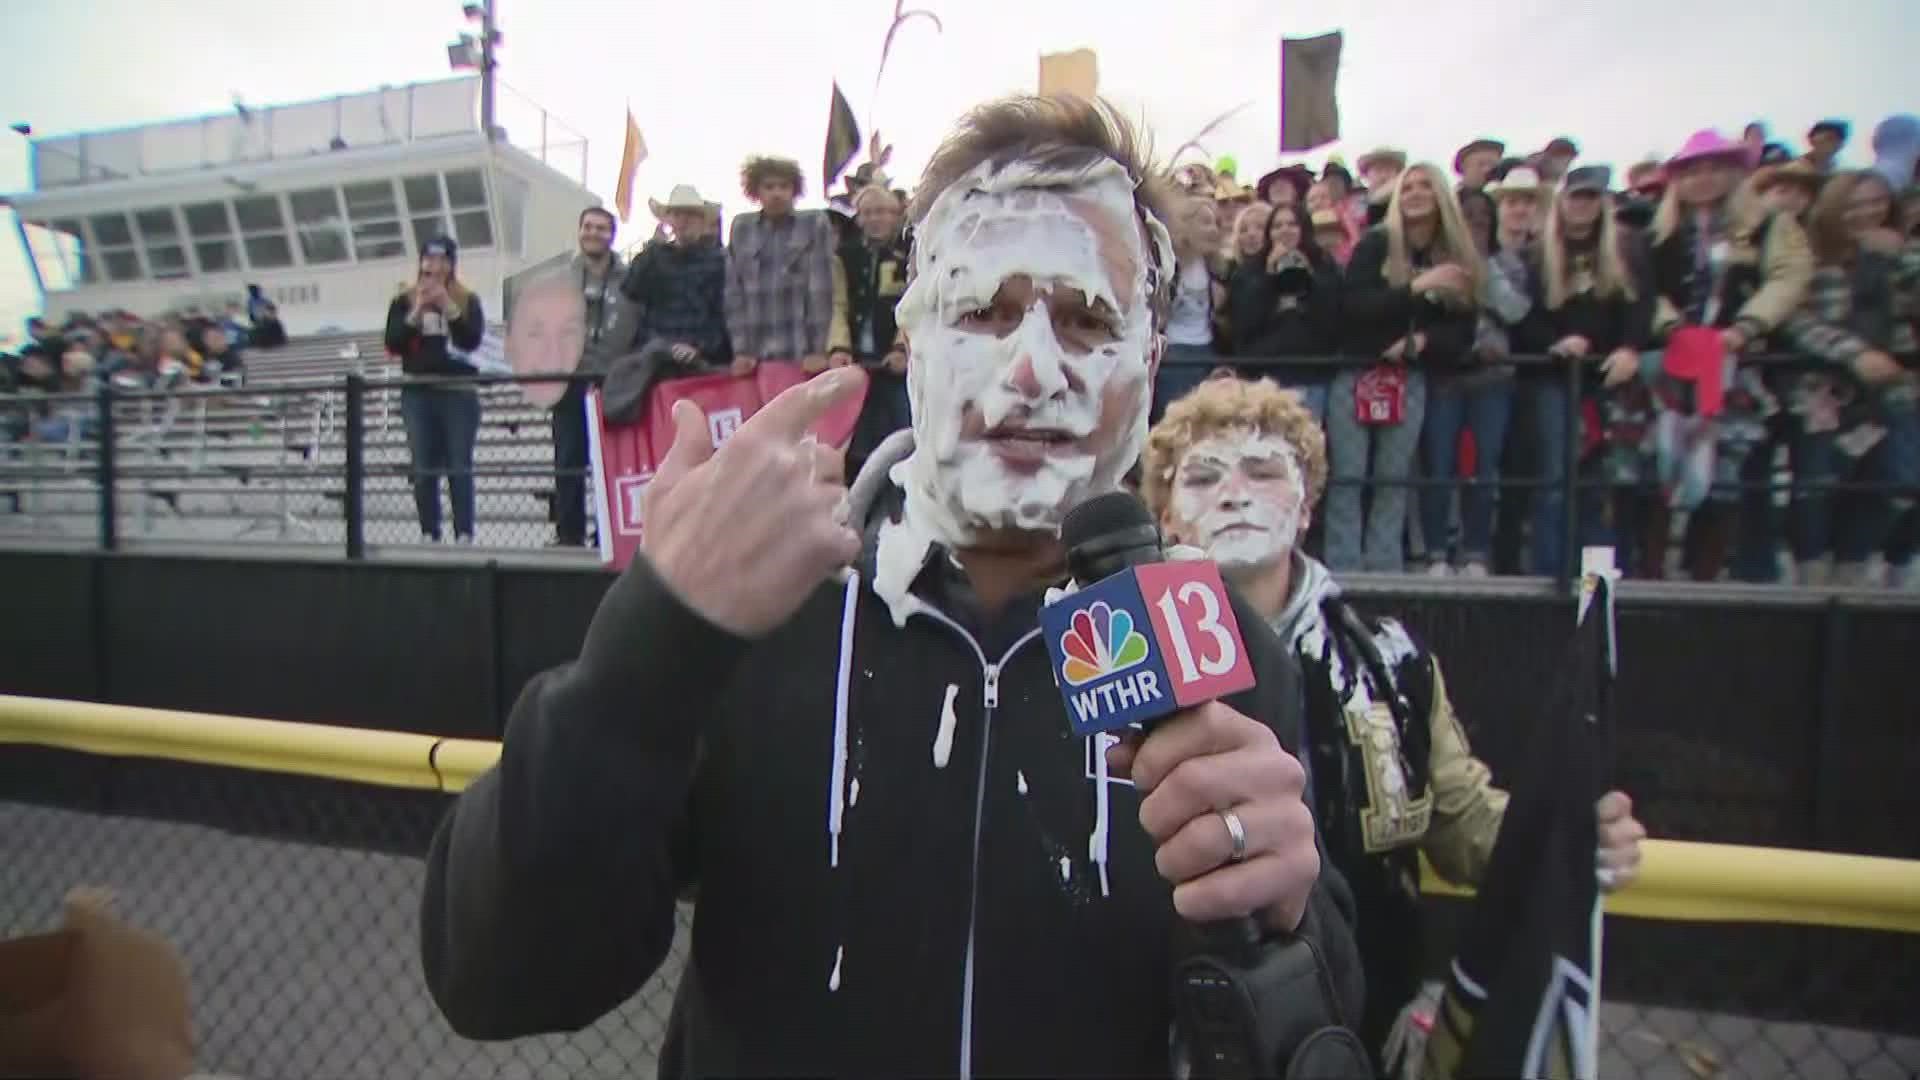 "Kids these days!" Dave Calabro, moments after getting a pie to the face courtesy of Lebanon High School.